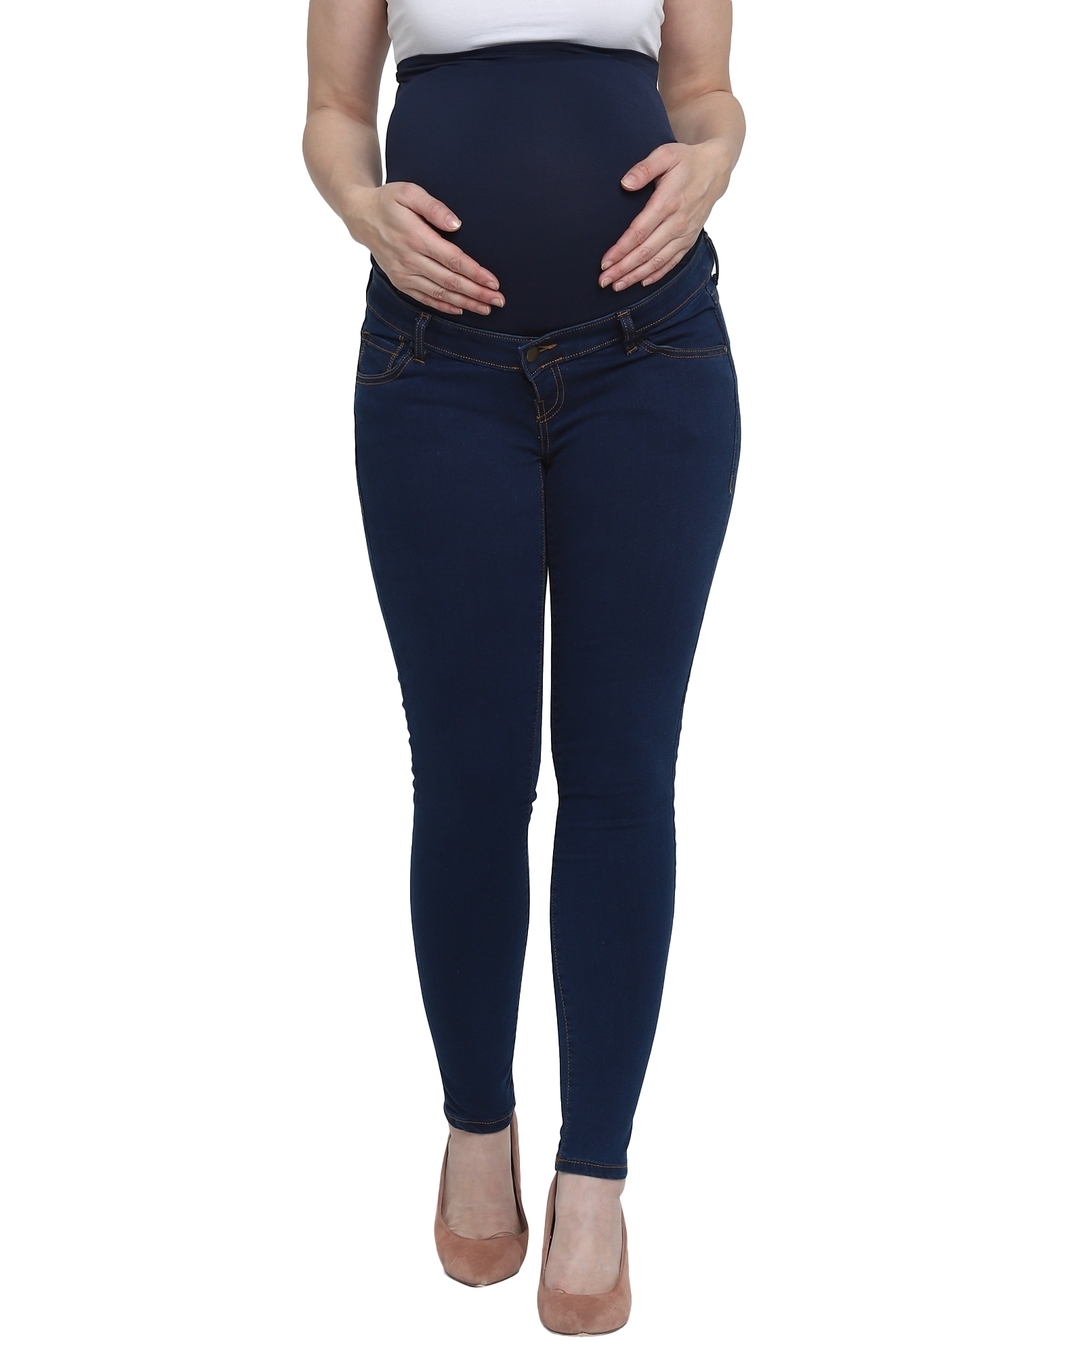 A-Line Maternity Top - Affordable Maternity Wear Online India - Chic Momz